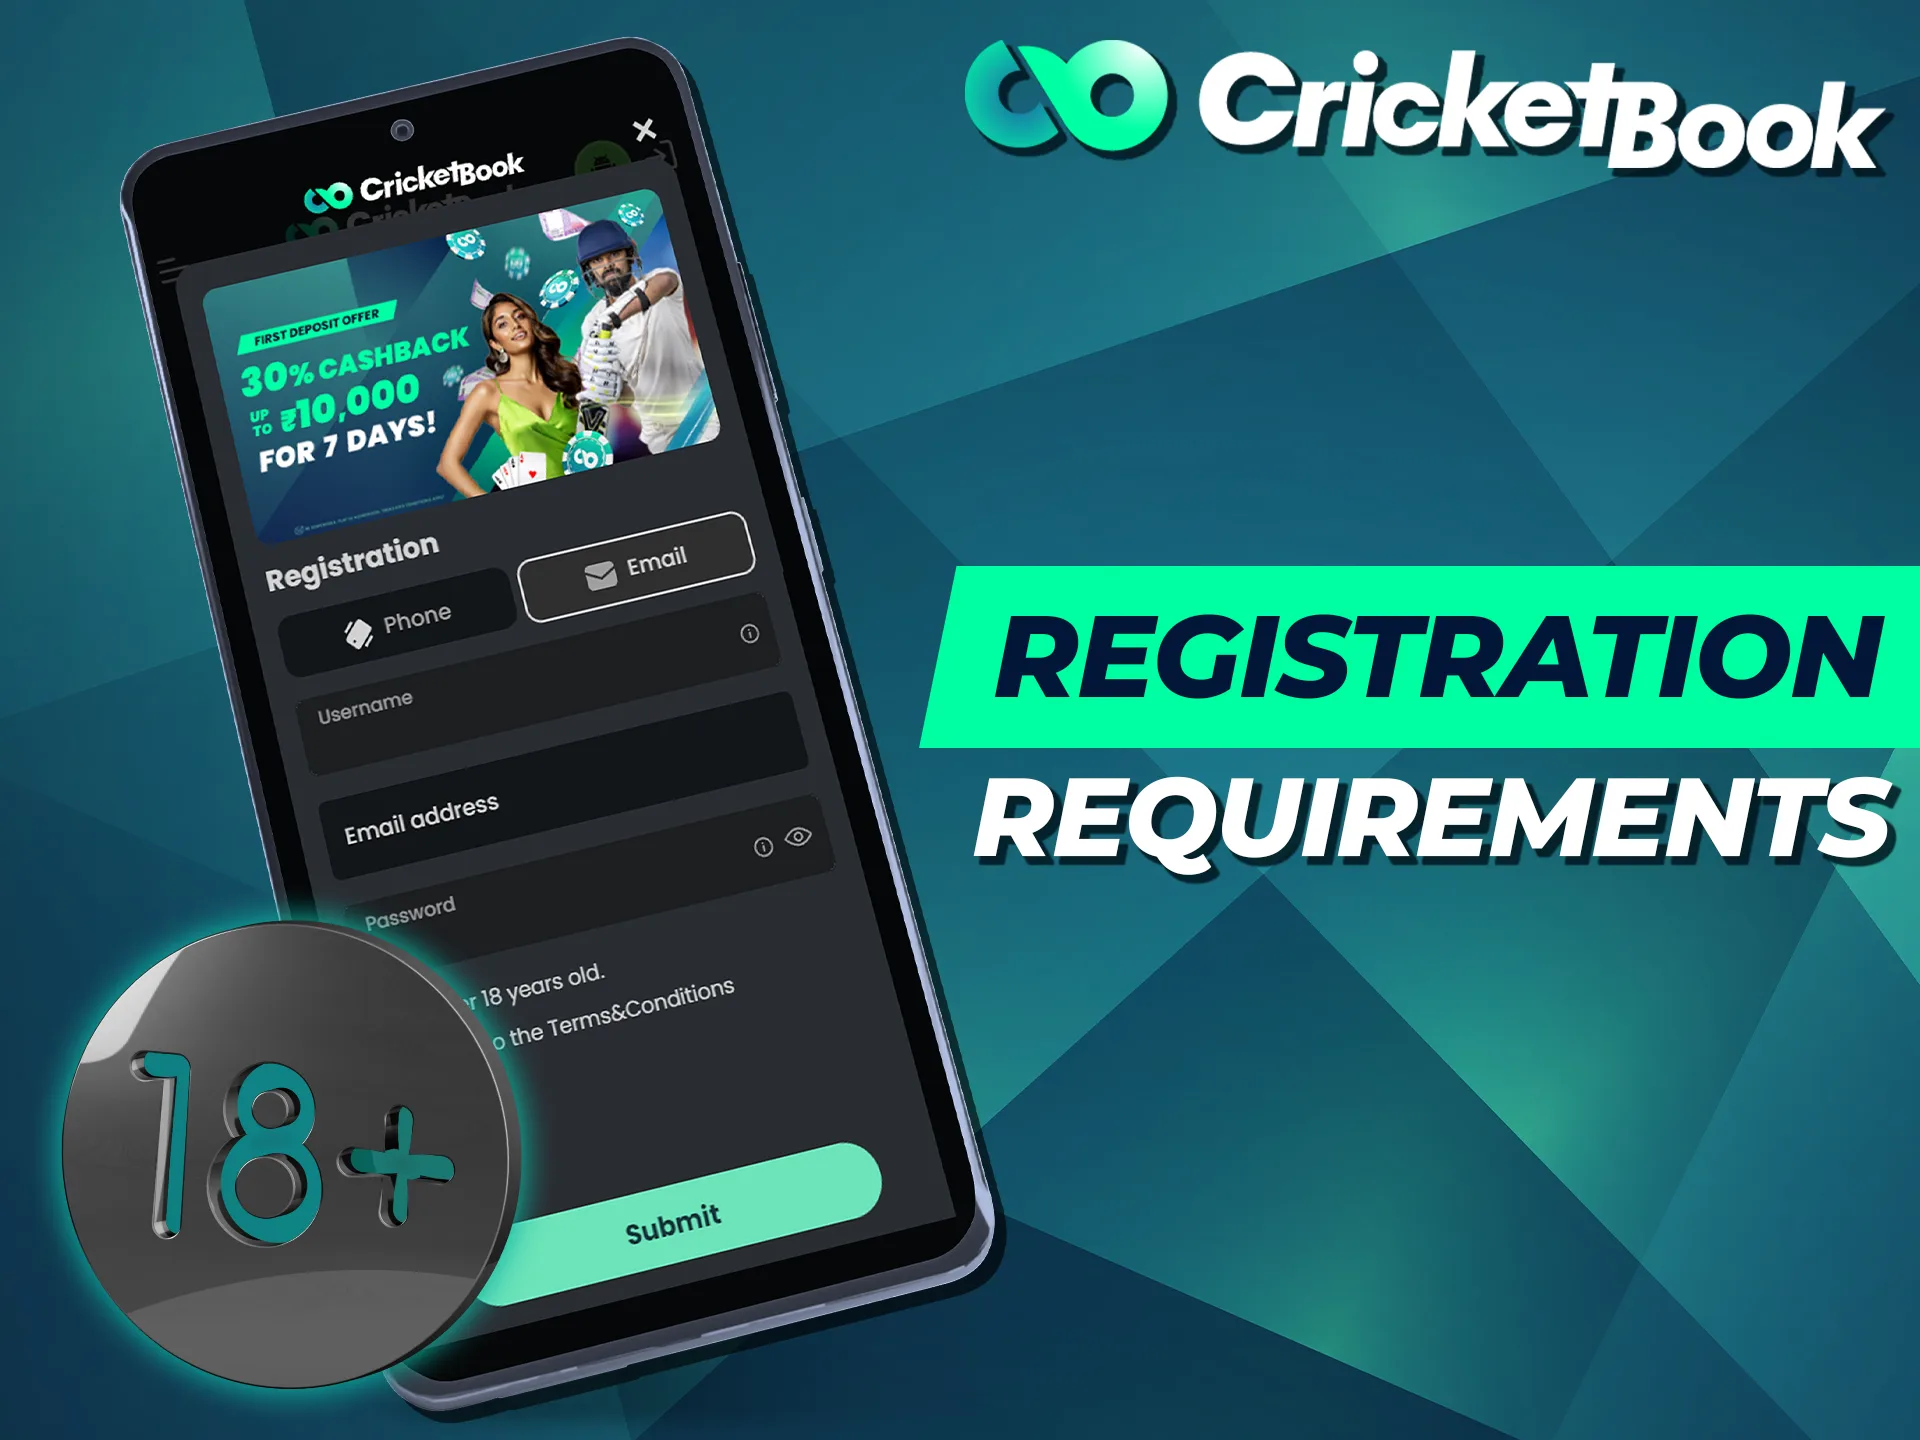 All users must be over 18 years of age to register at Cricketbook.